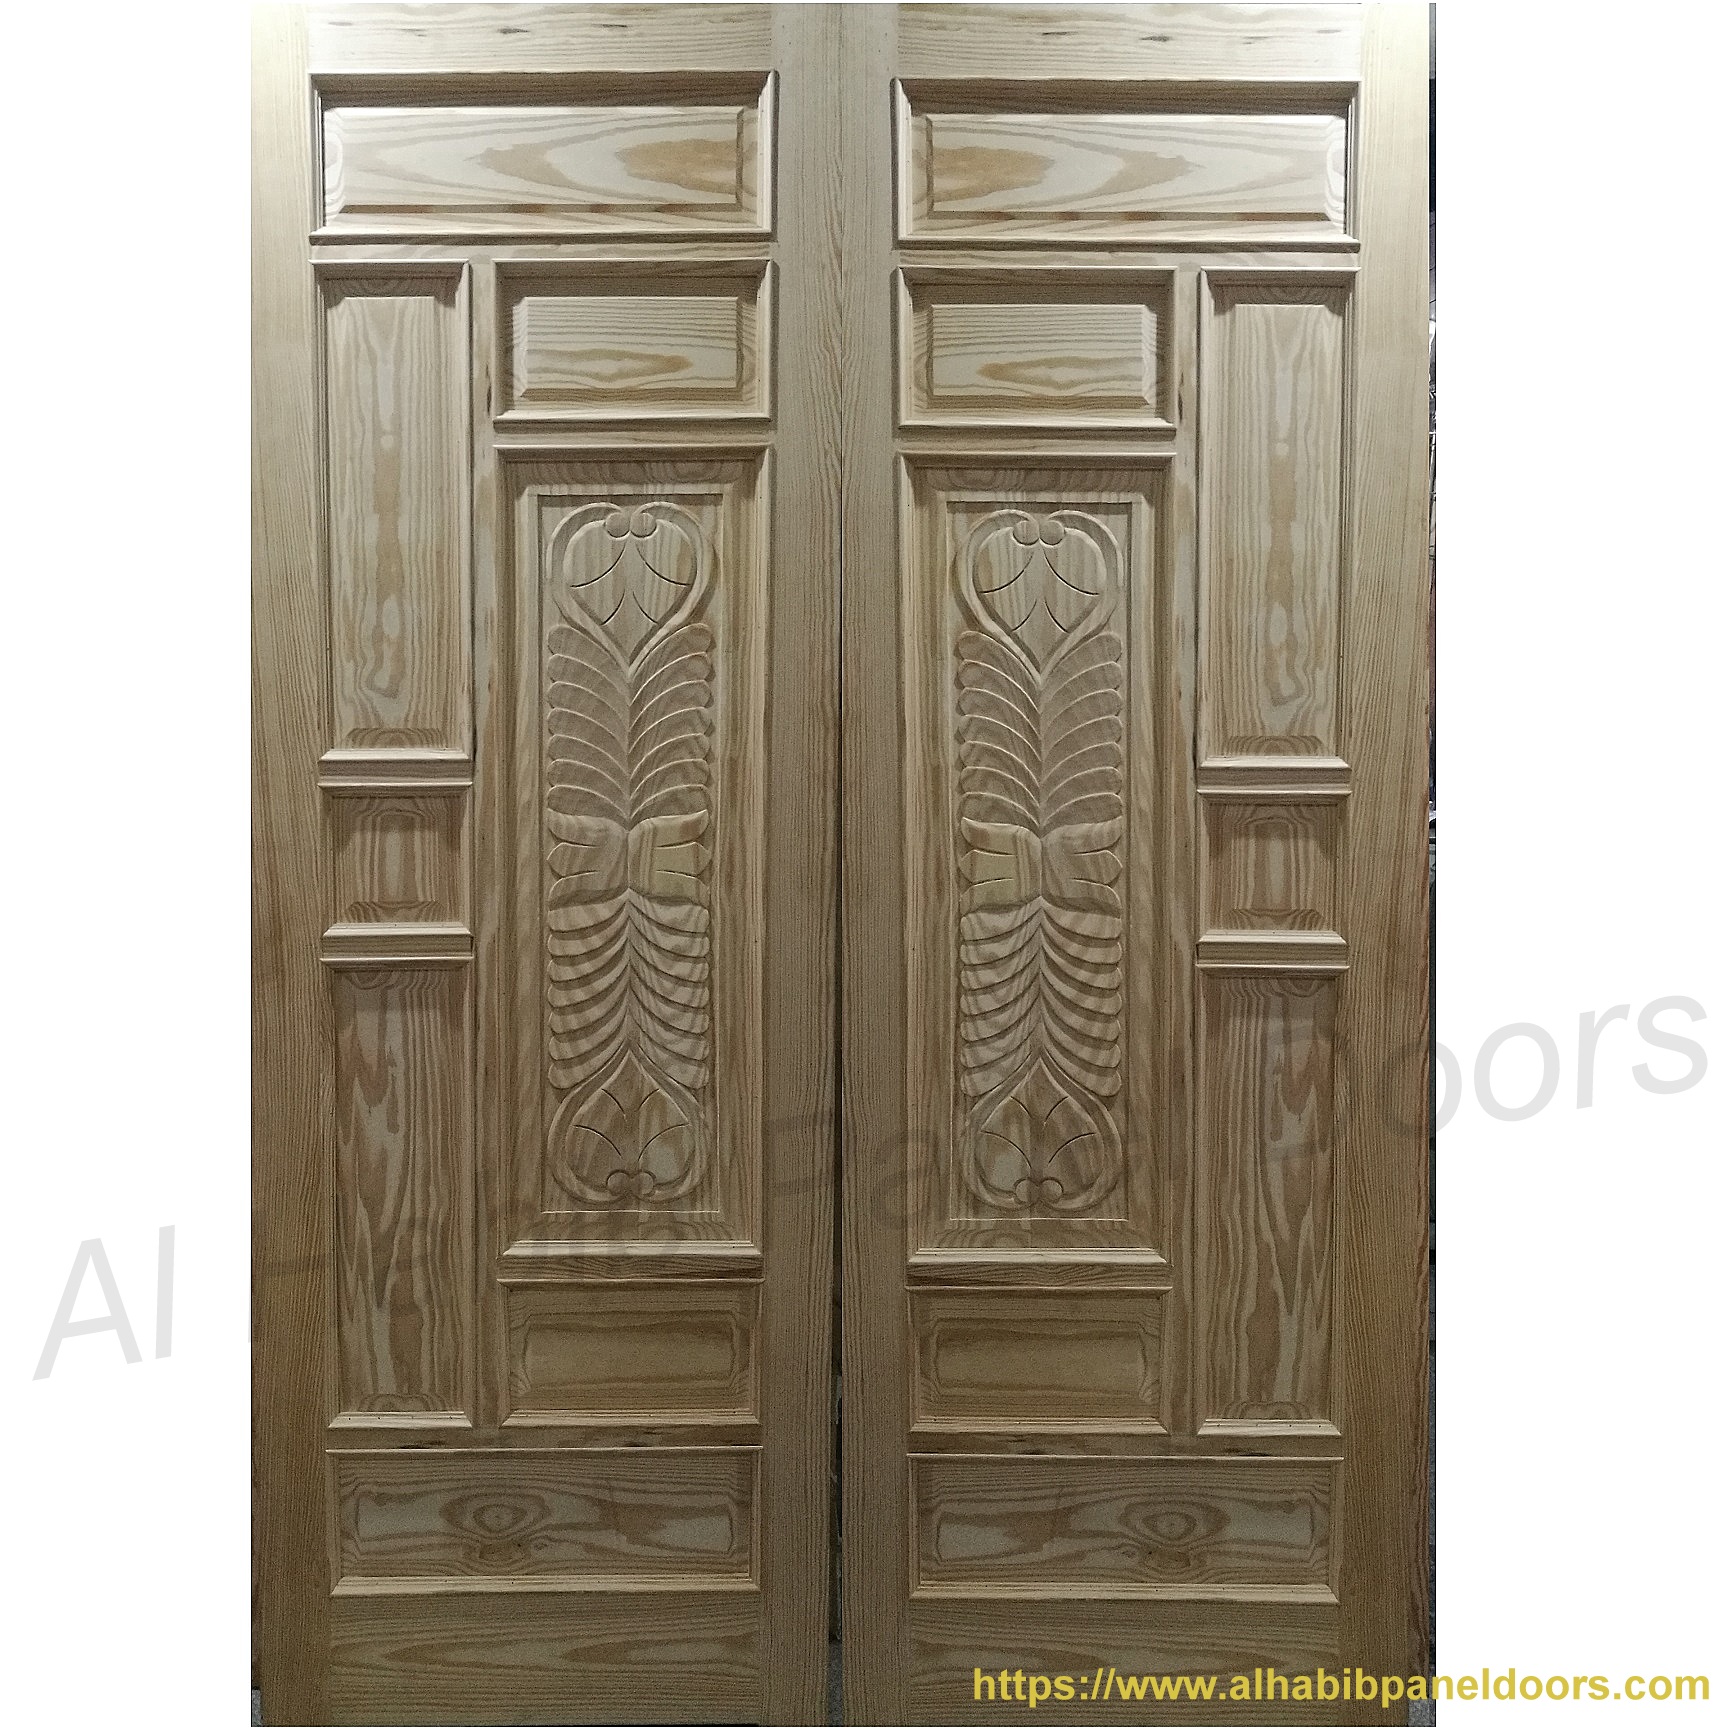 Yellow Pine Wood Main Double Door With Beautiful Carving